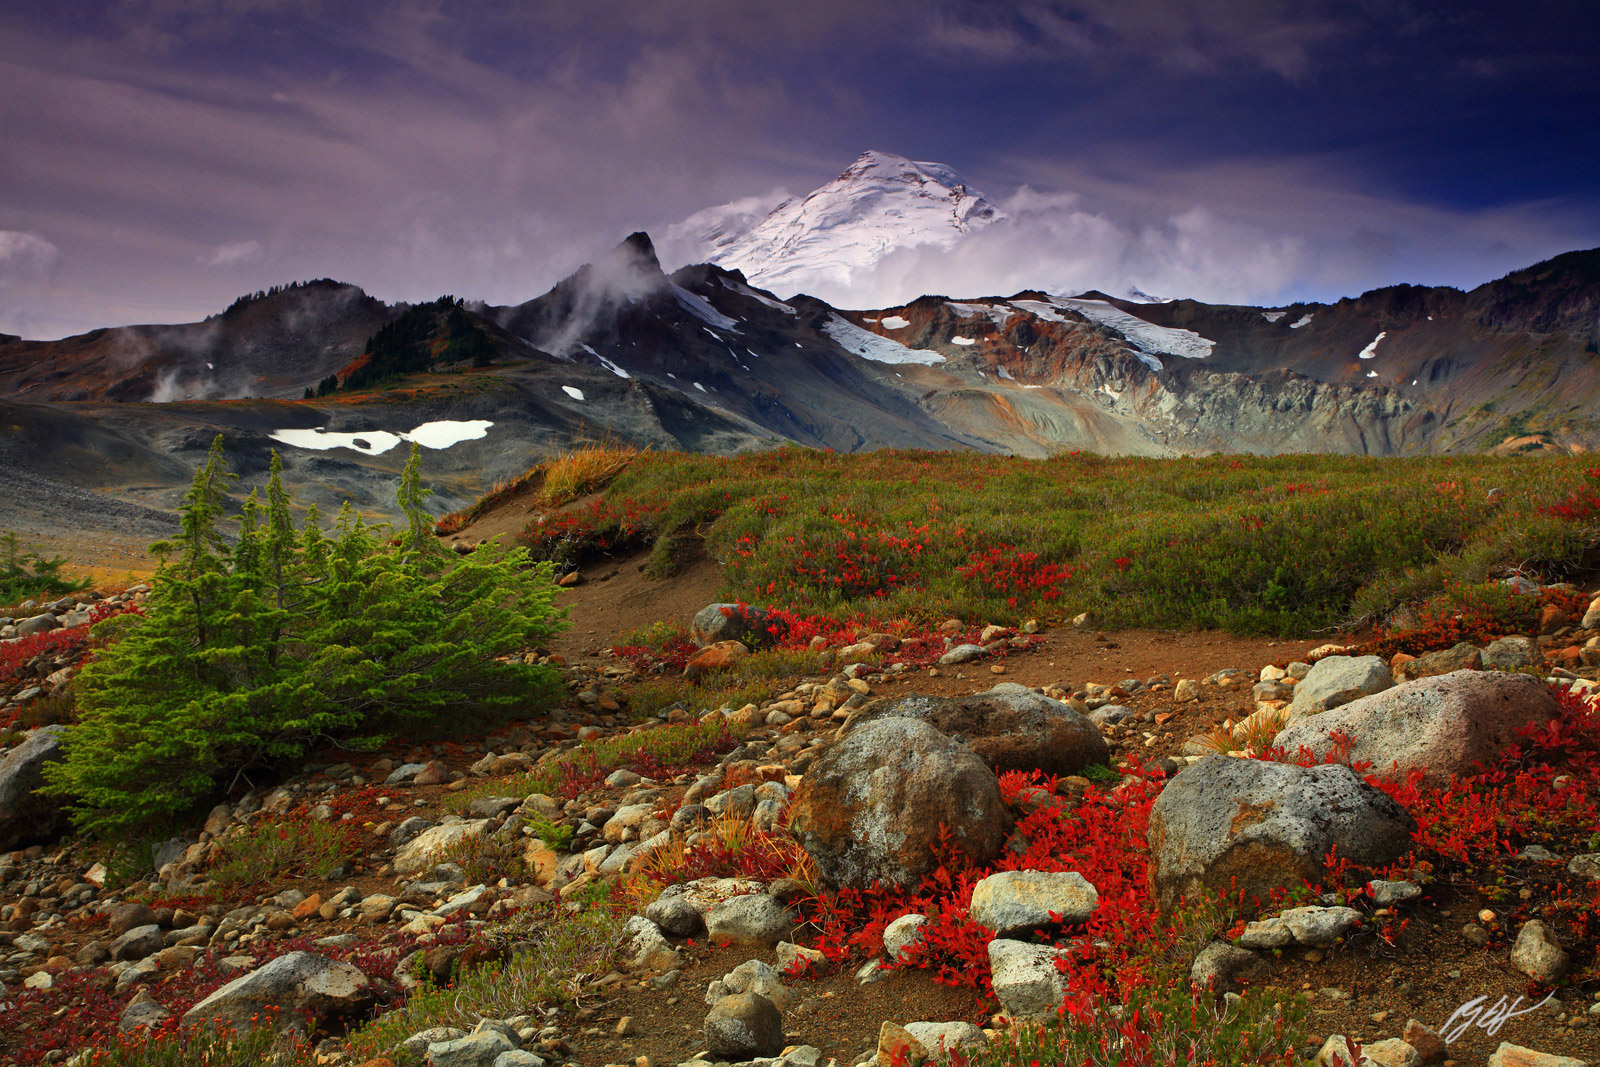 Morning Light as Mt. Baker Peaks out of the Clouds from Ptarmigan Ridge in the Mt Baker Wilderness in Washington